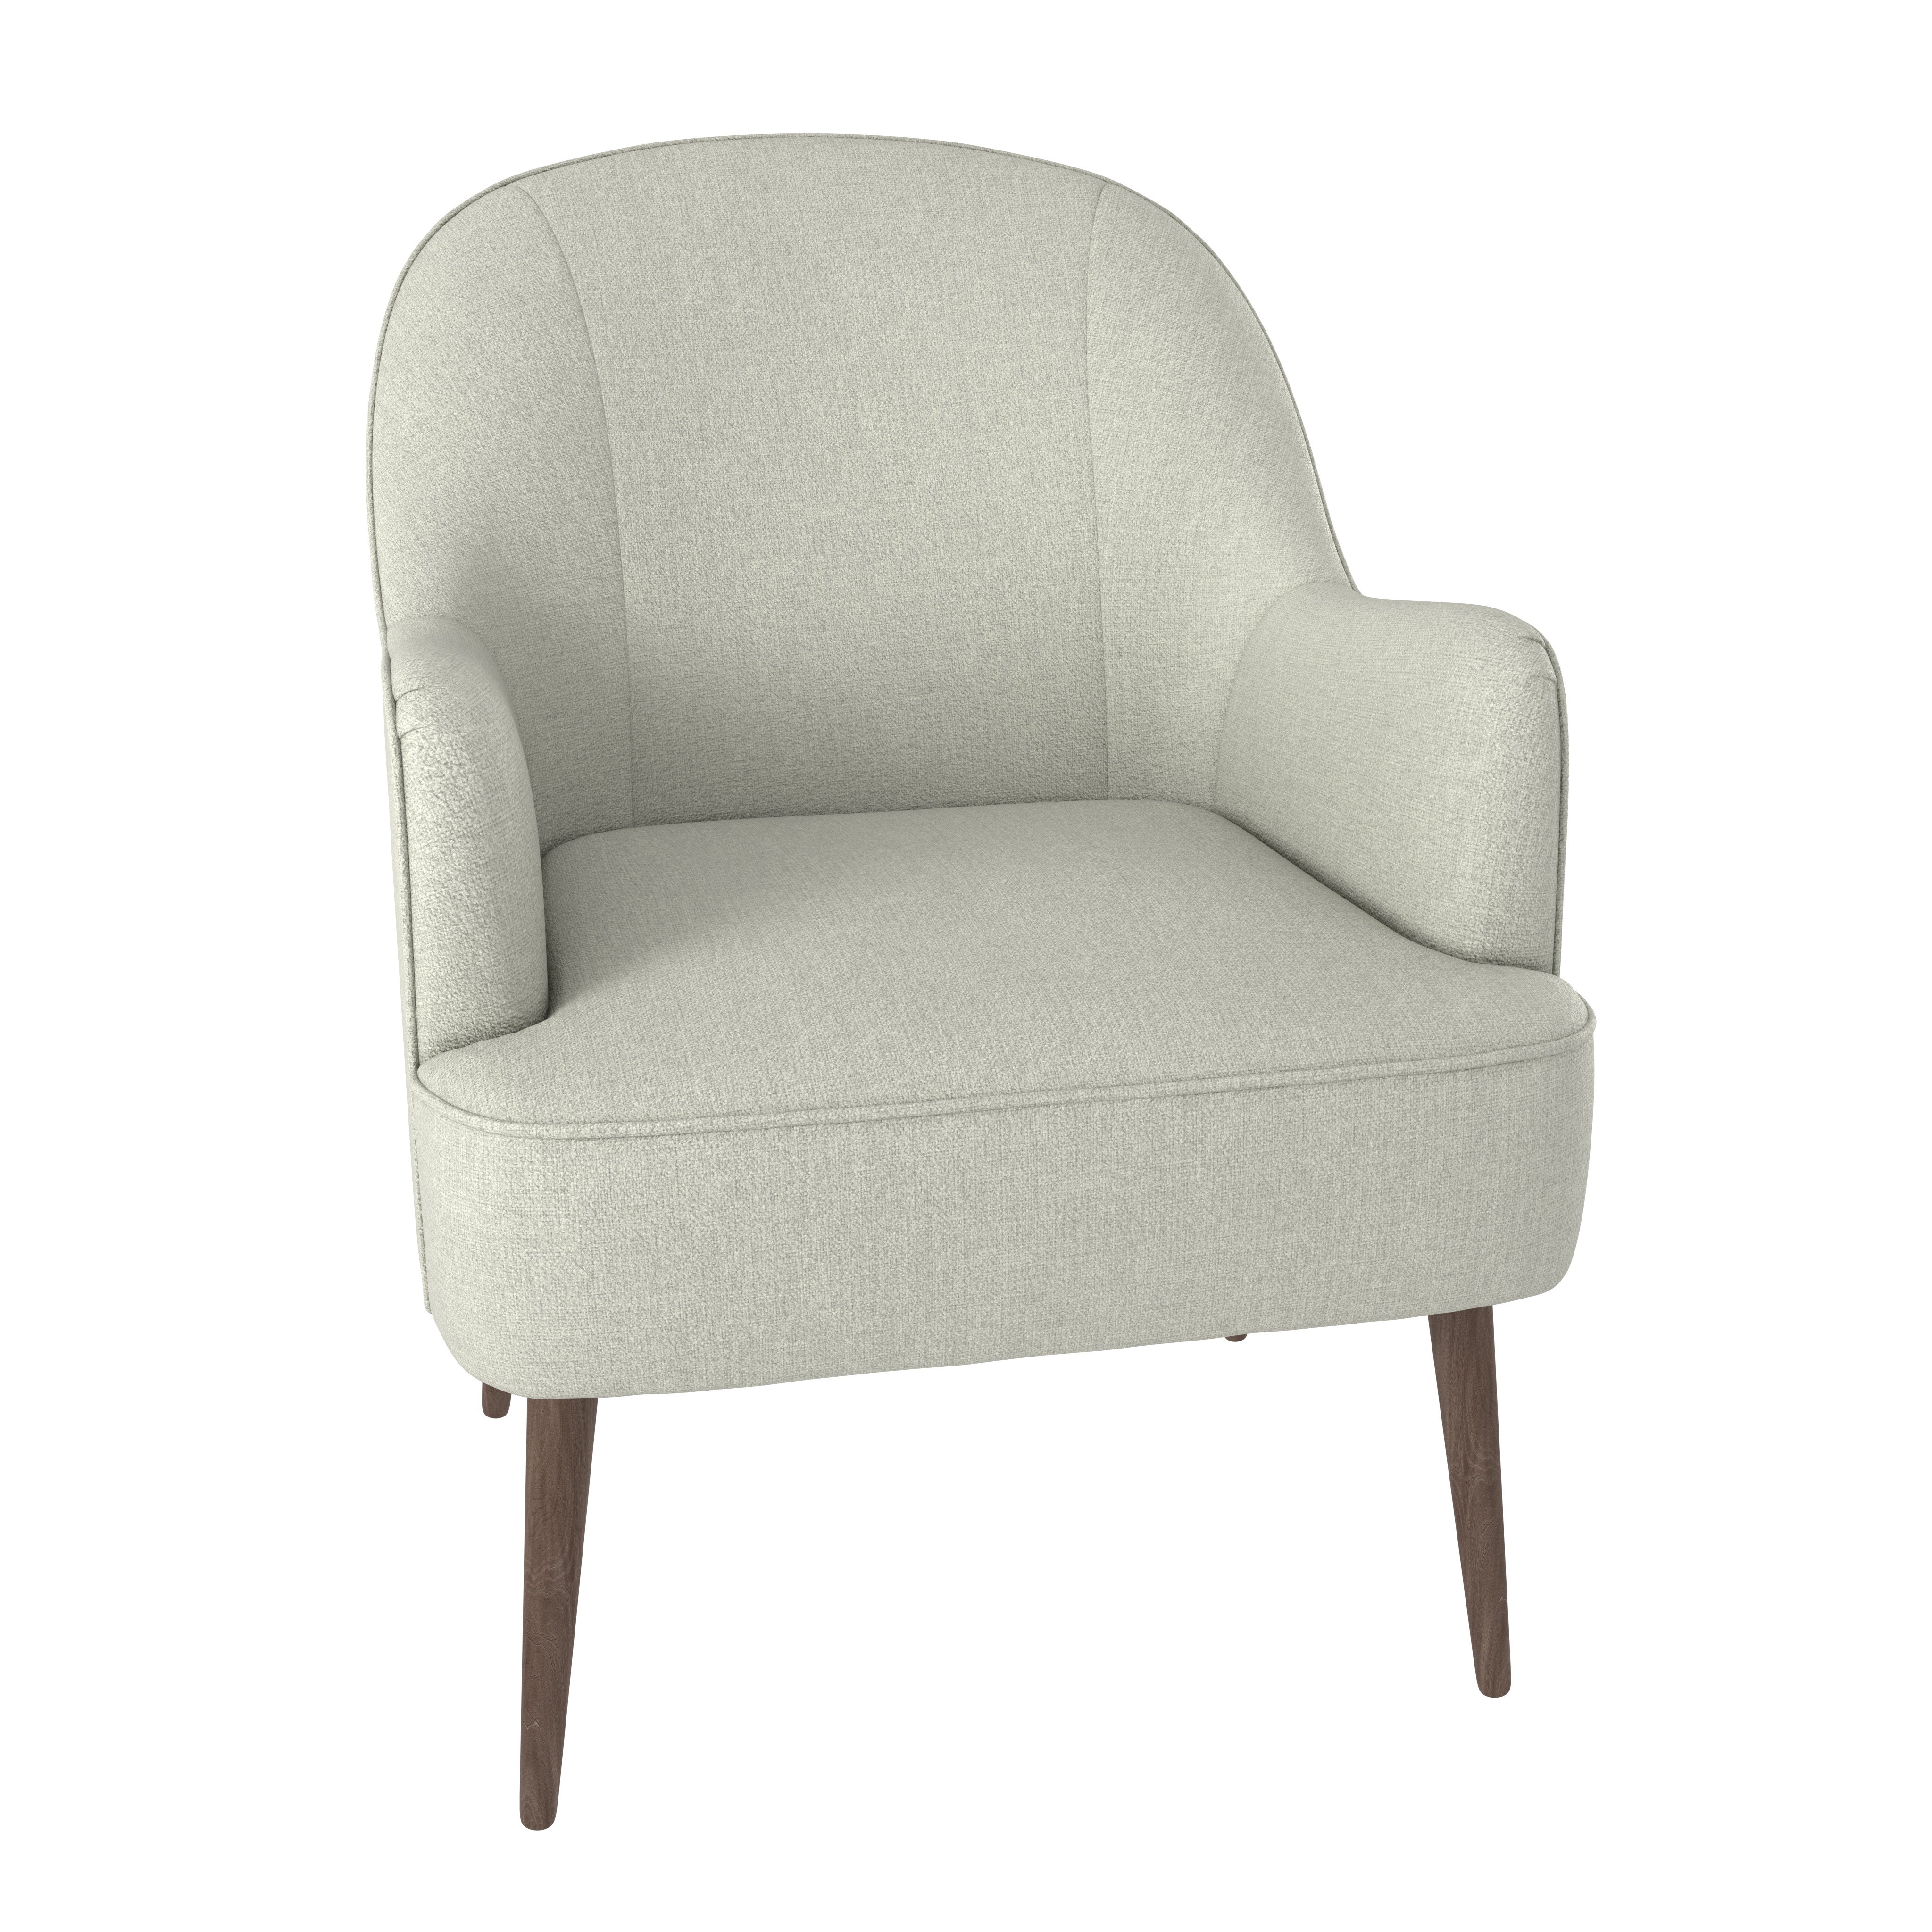 Bailey Brushed Plain Fabric Occasional Chair Cream